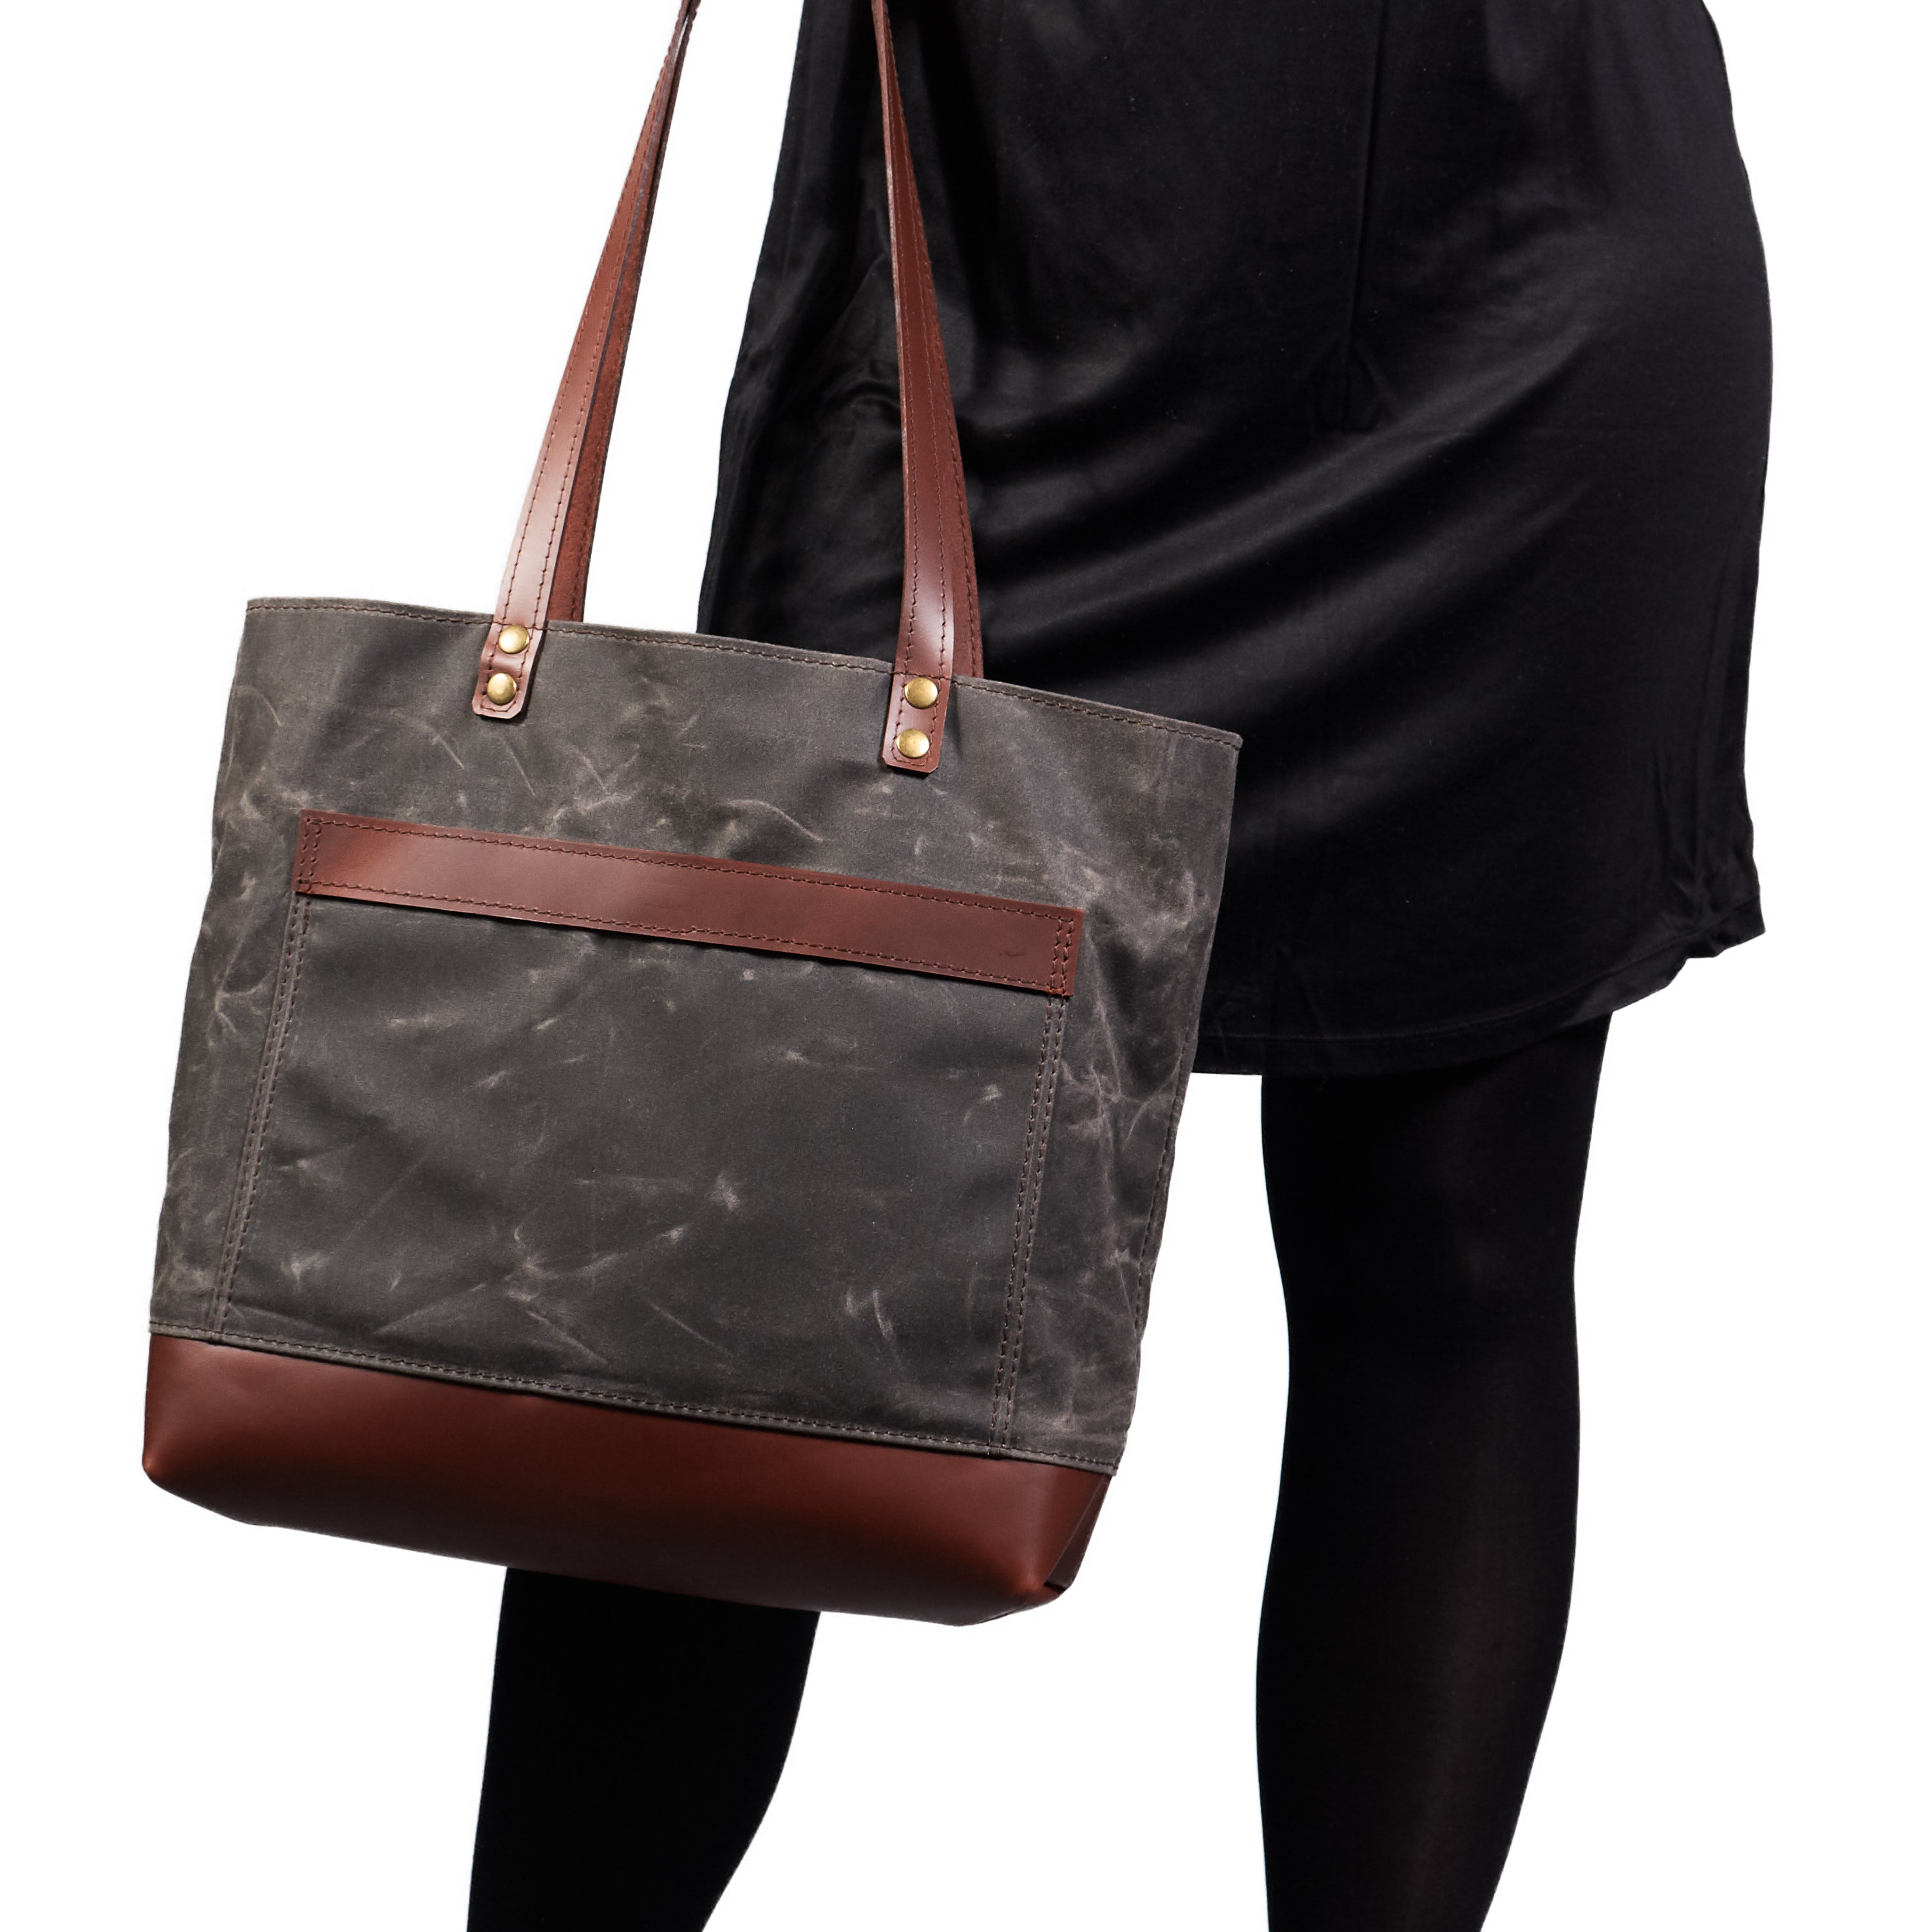 Waxed canvas tote bag with leather handles in dark brown